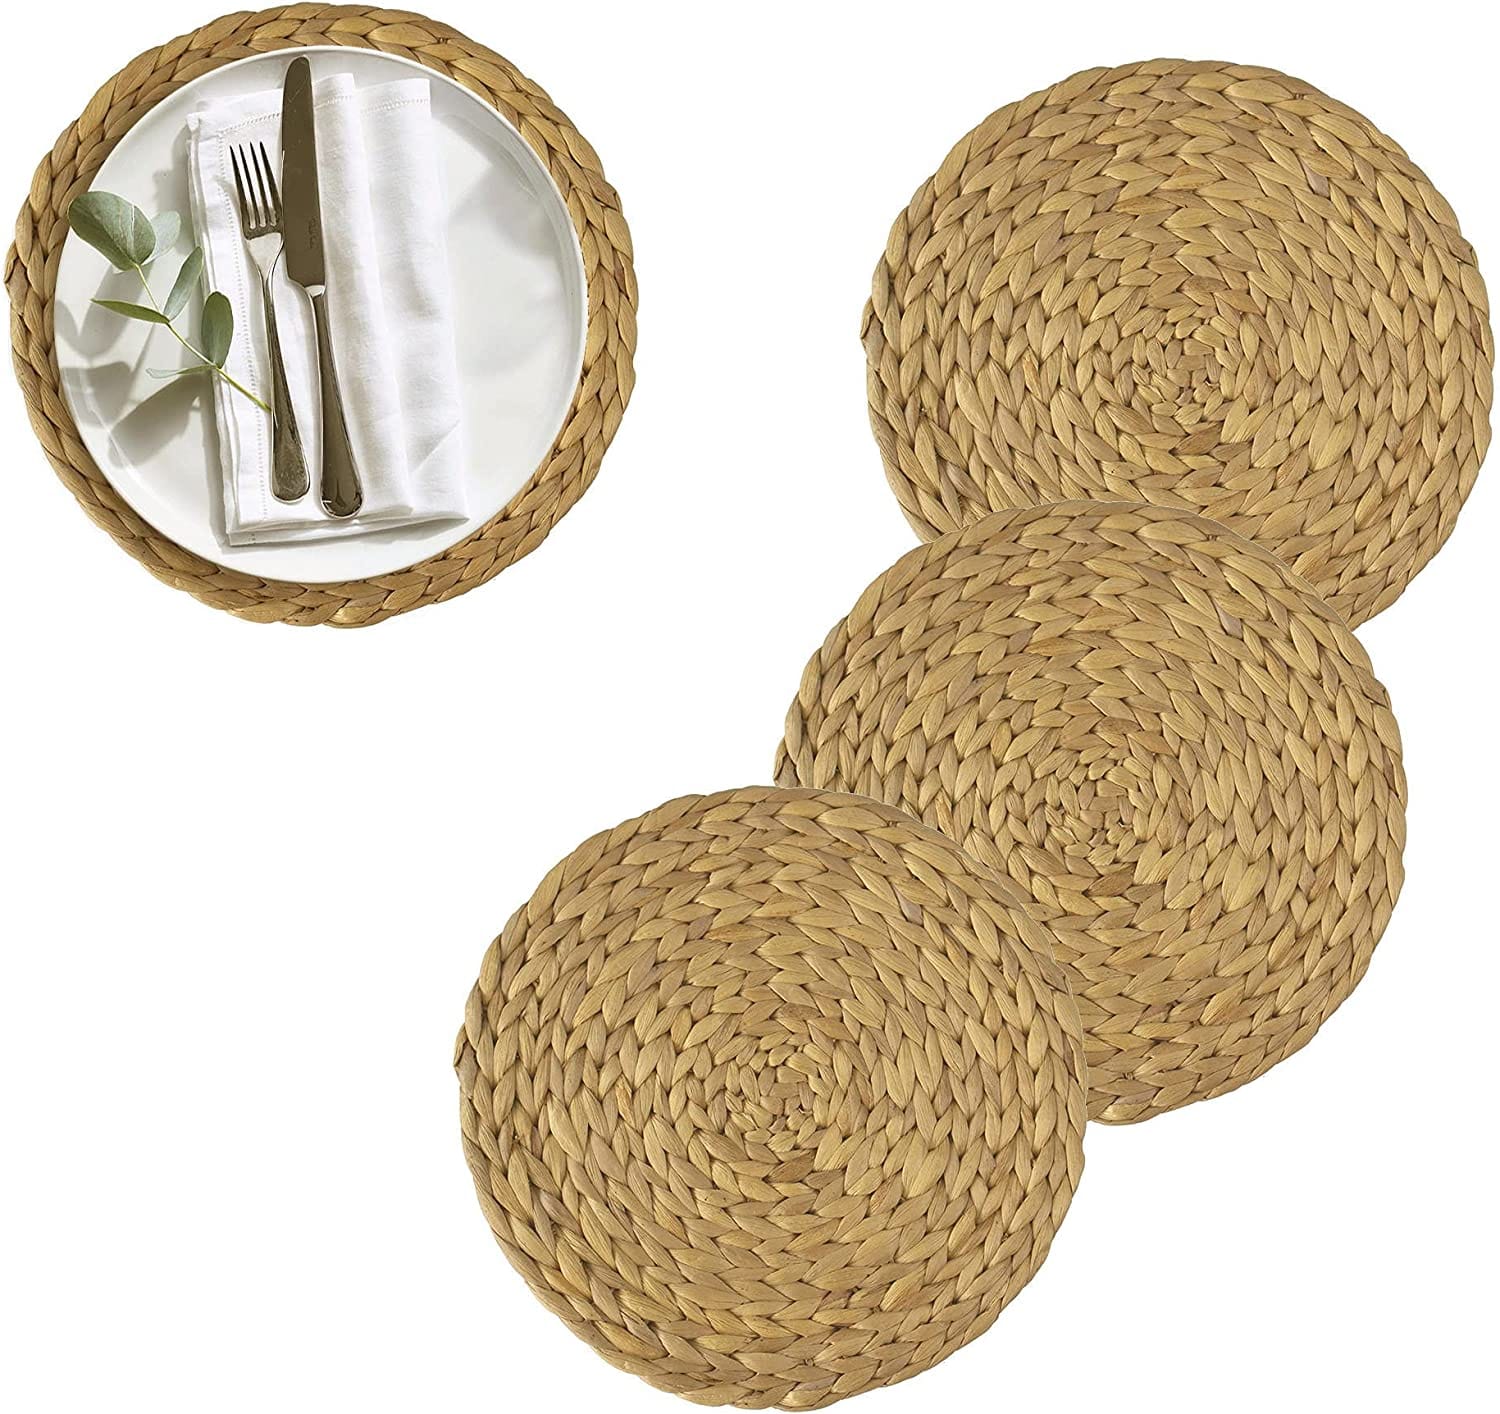 Set 4 Rustic Charger Plates Water Hyacinth Decorative Round Placemats for Dining Table - Almondscove